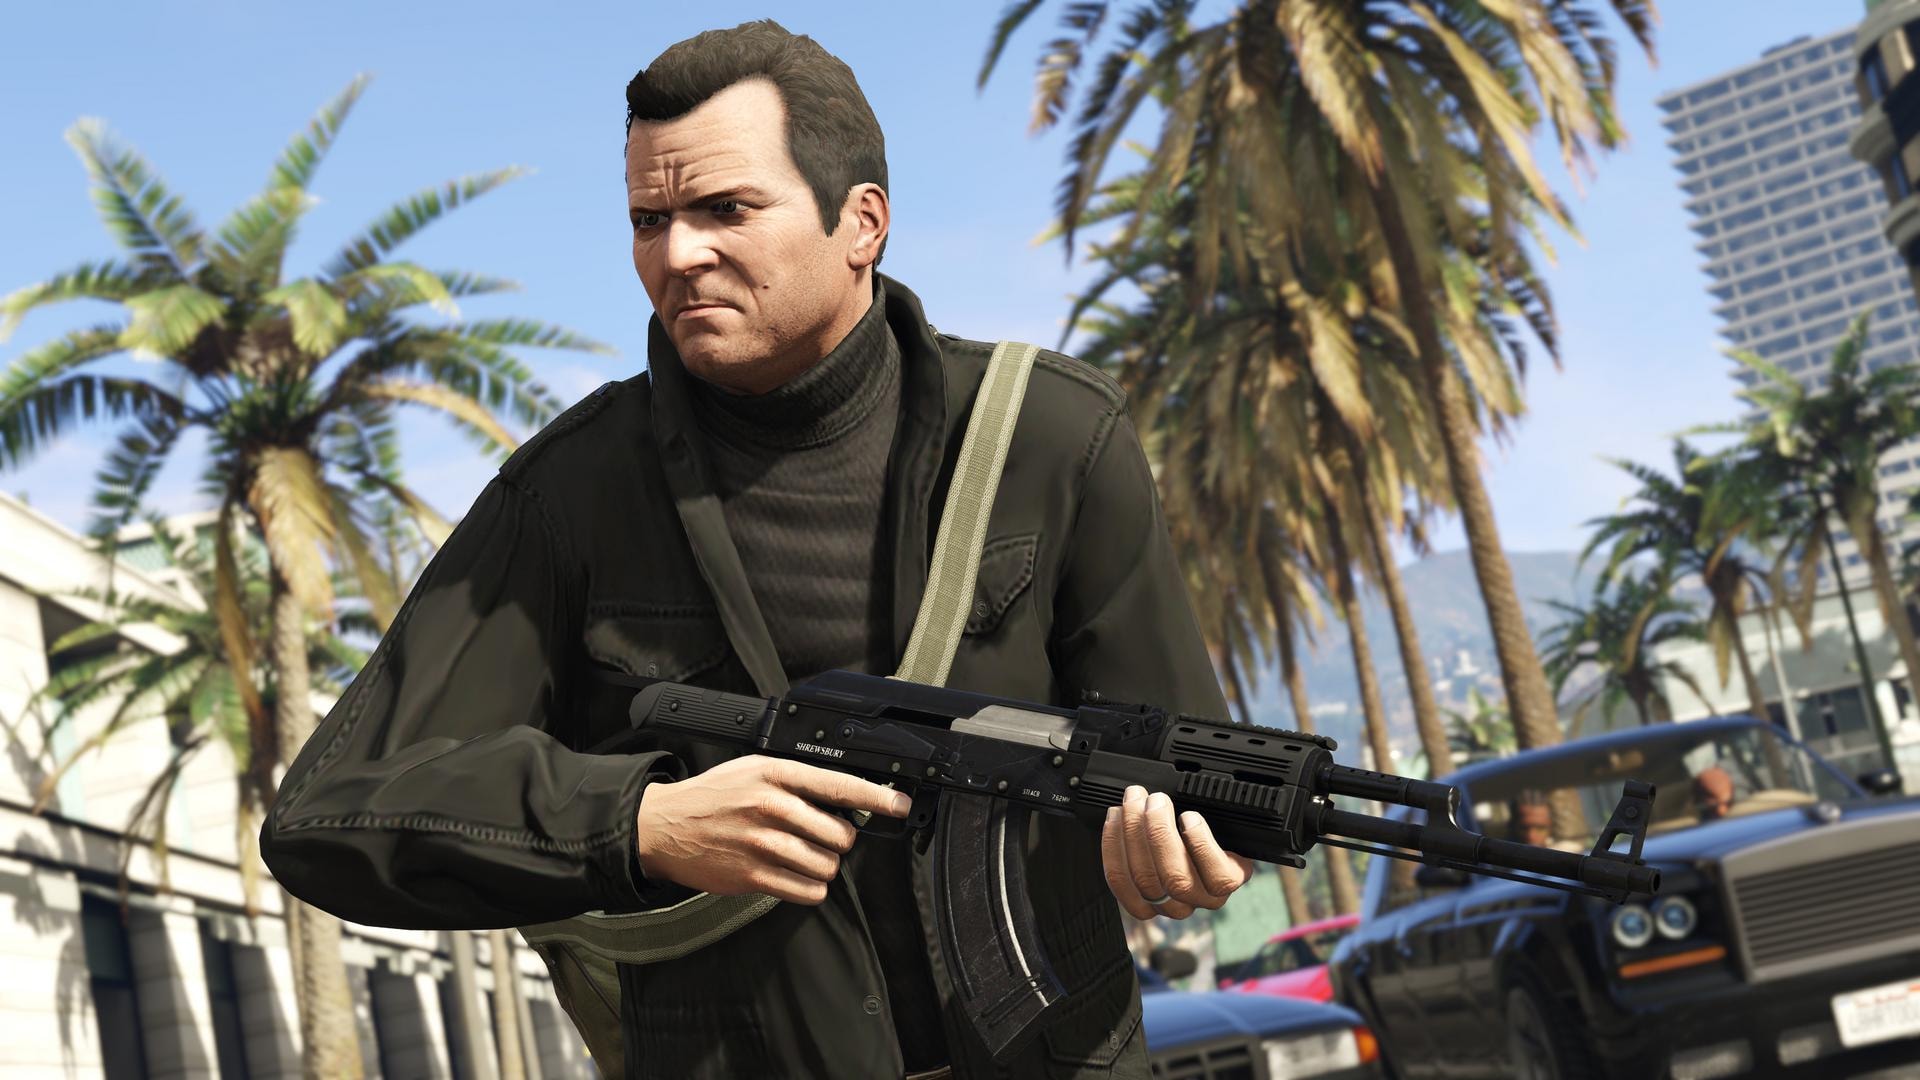 gta-6-could-actor-from-gta-5-also-be-in-the-new-game-ned-luke-weighs-in